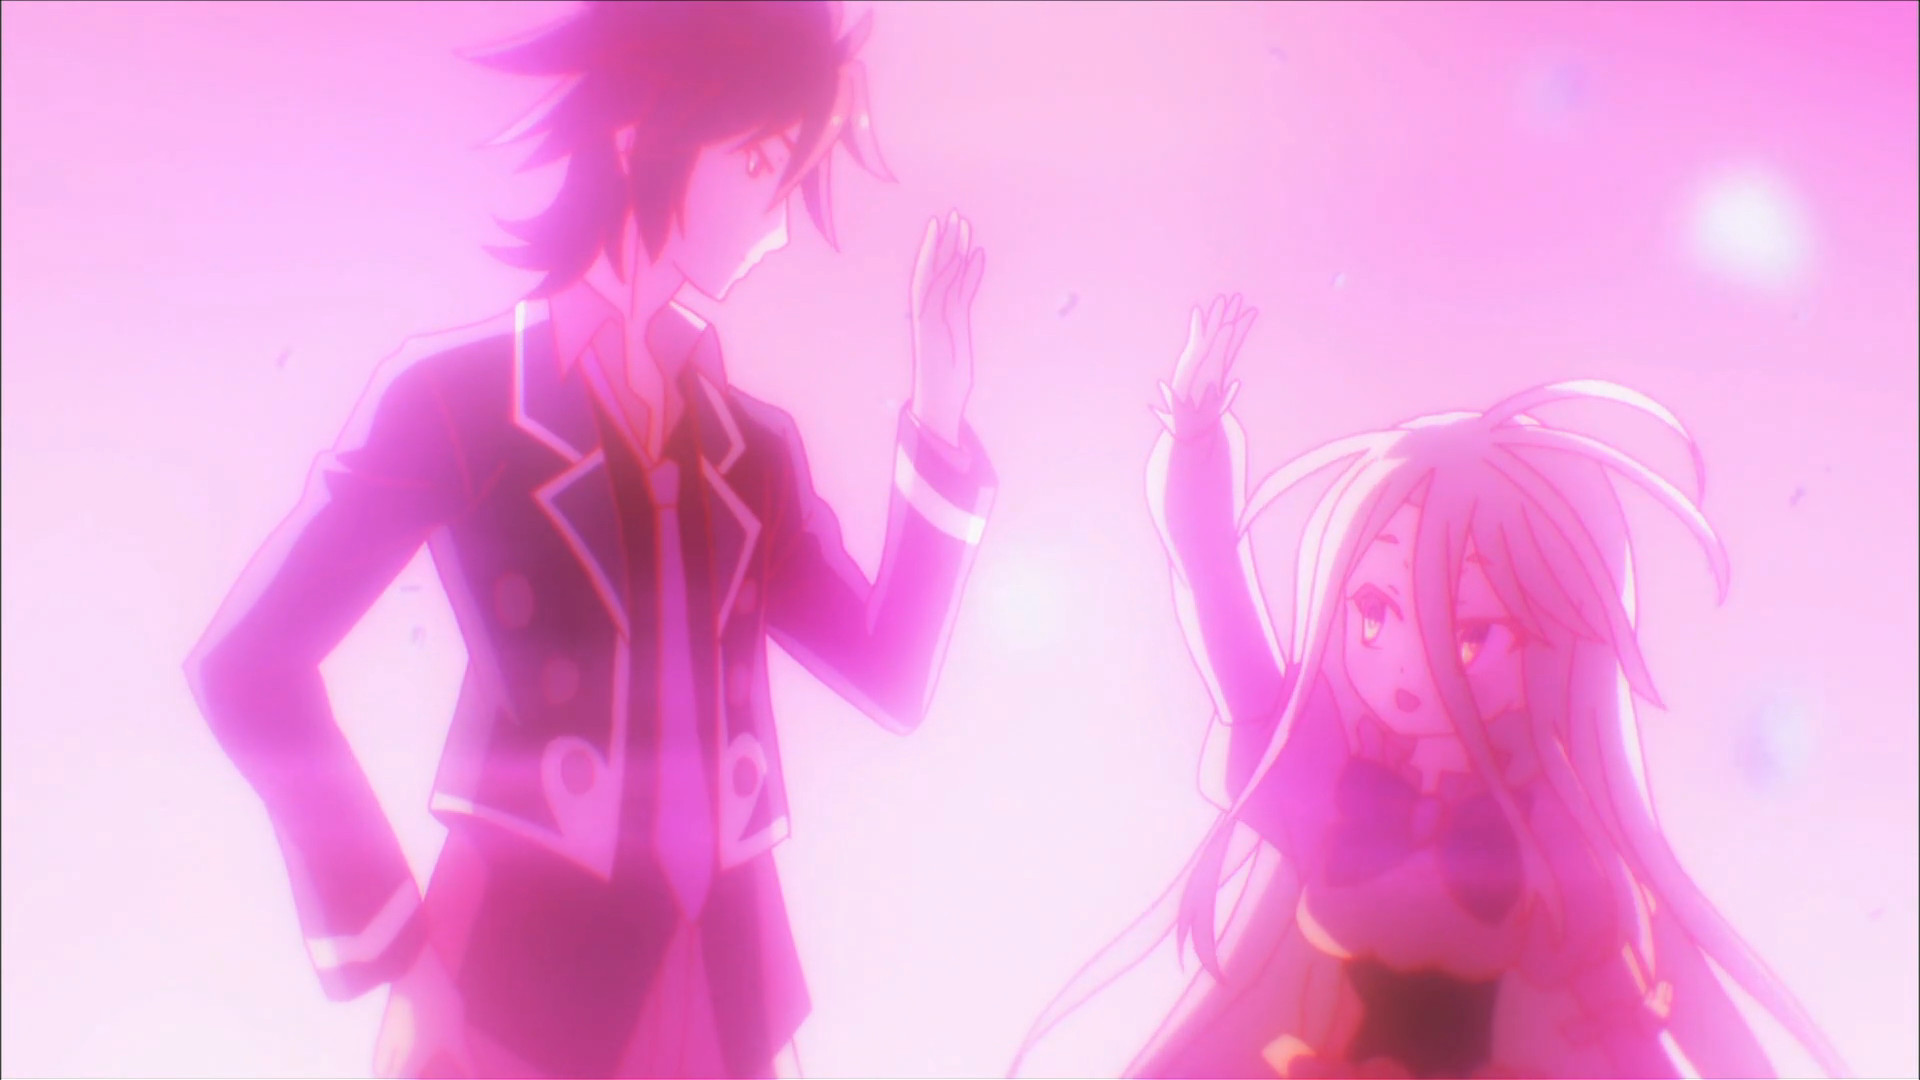 And the No Game No Life "Gamer's Glory" Sweepstakes Winner is...